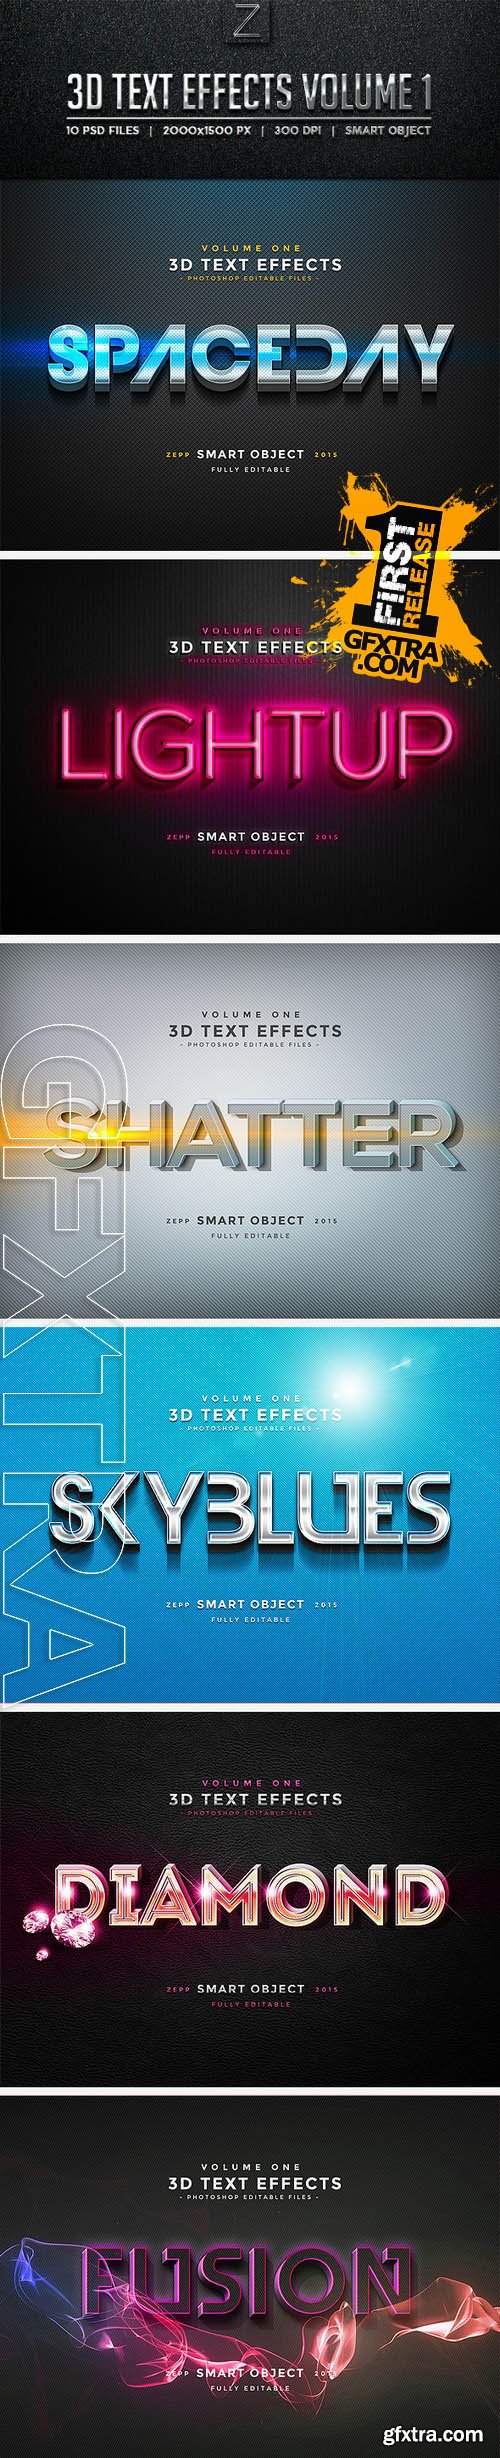 Graphicriver 3D Text Effects Vol.1 10156254